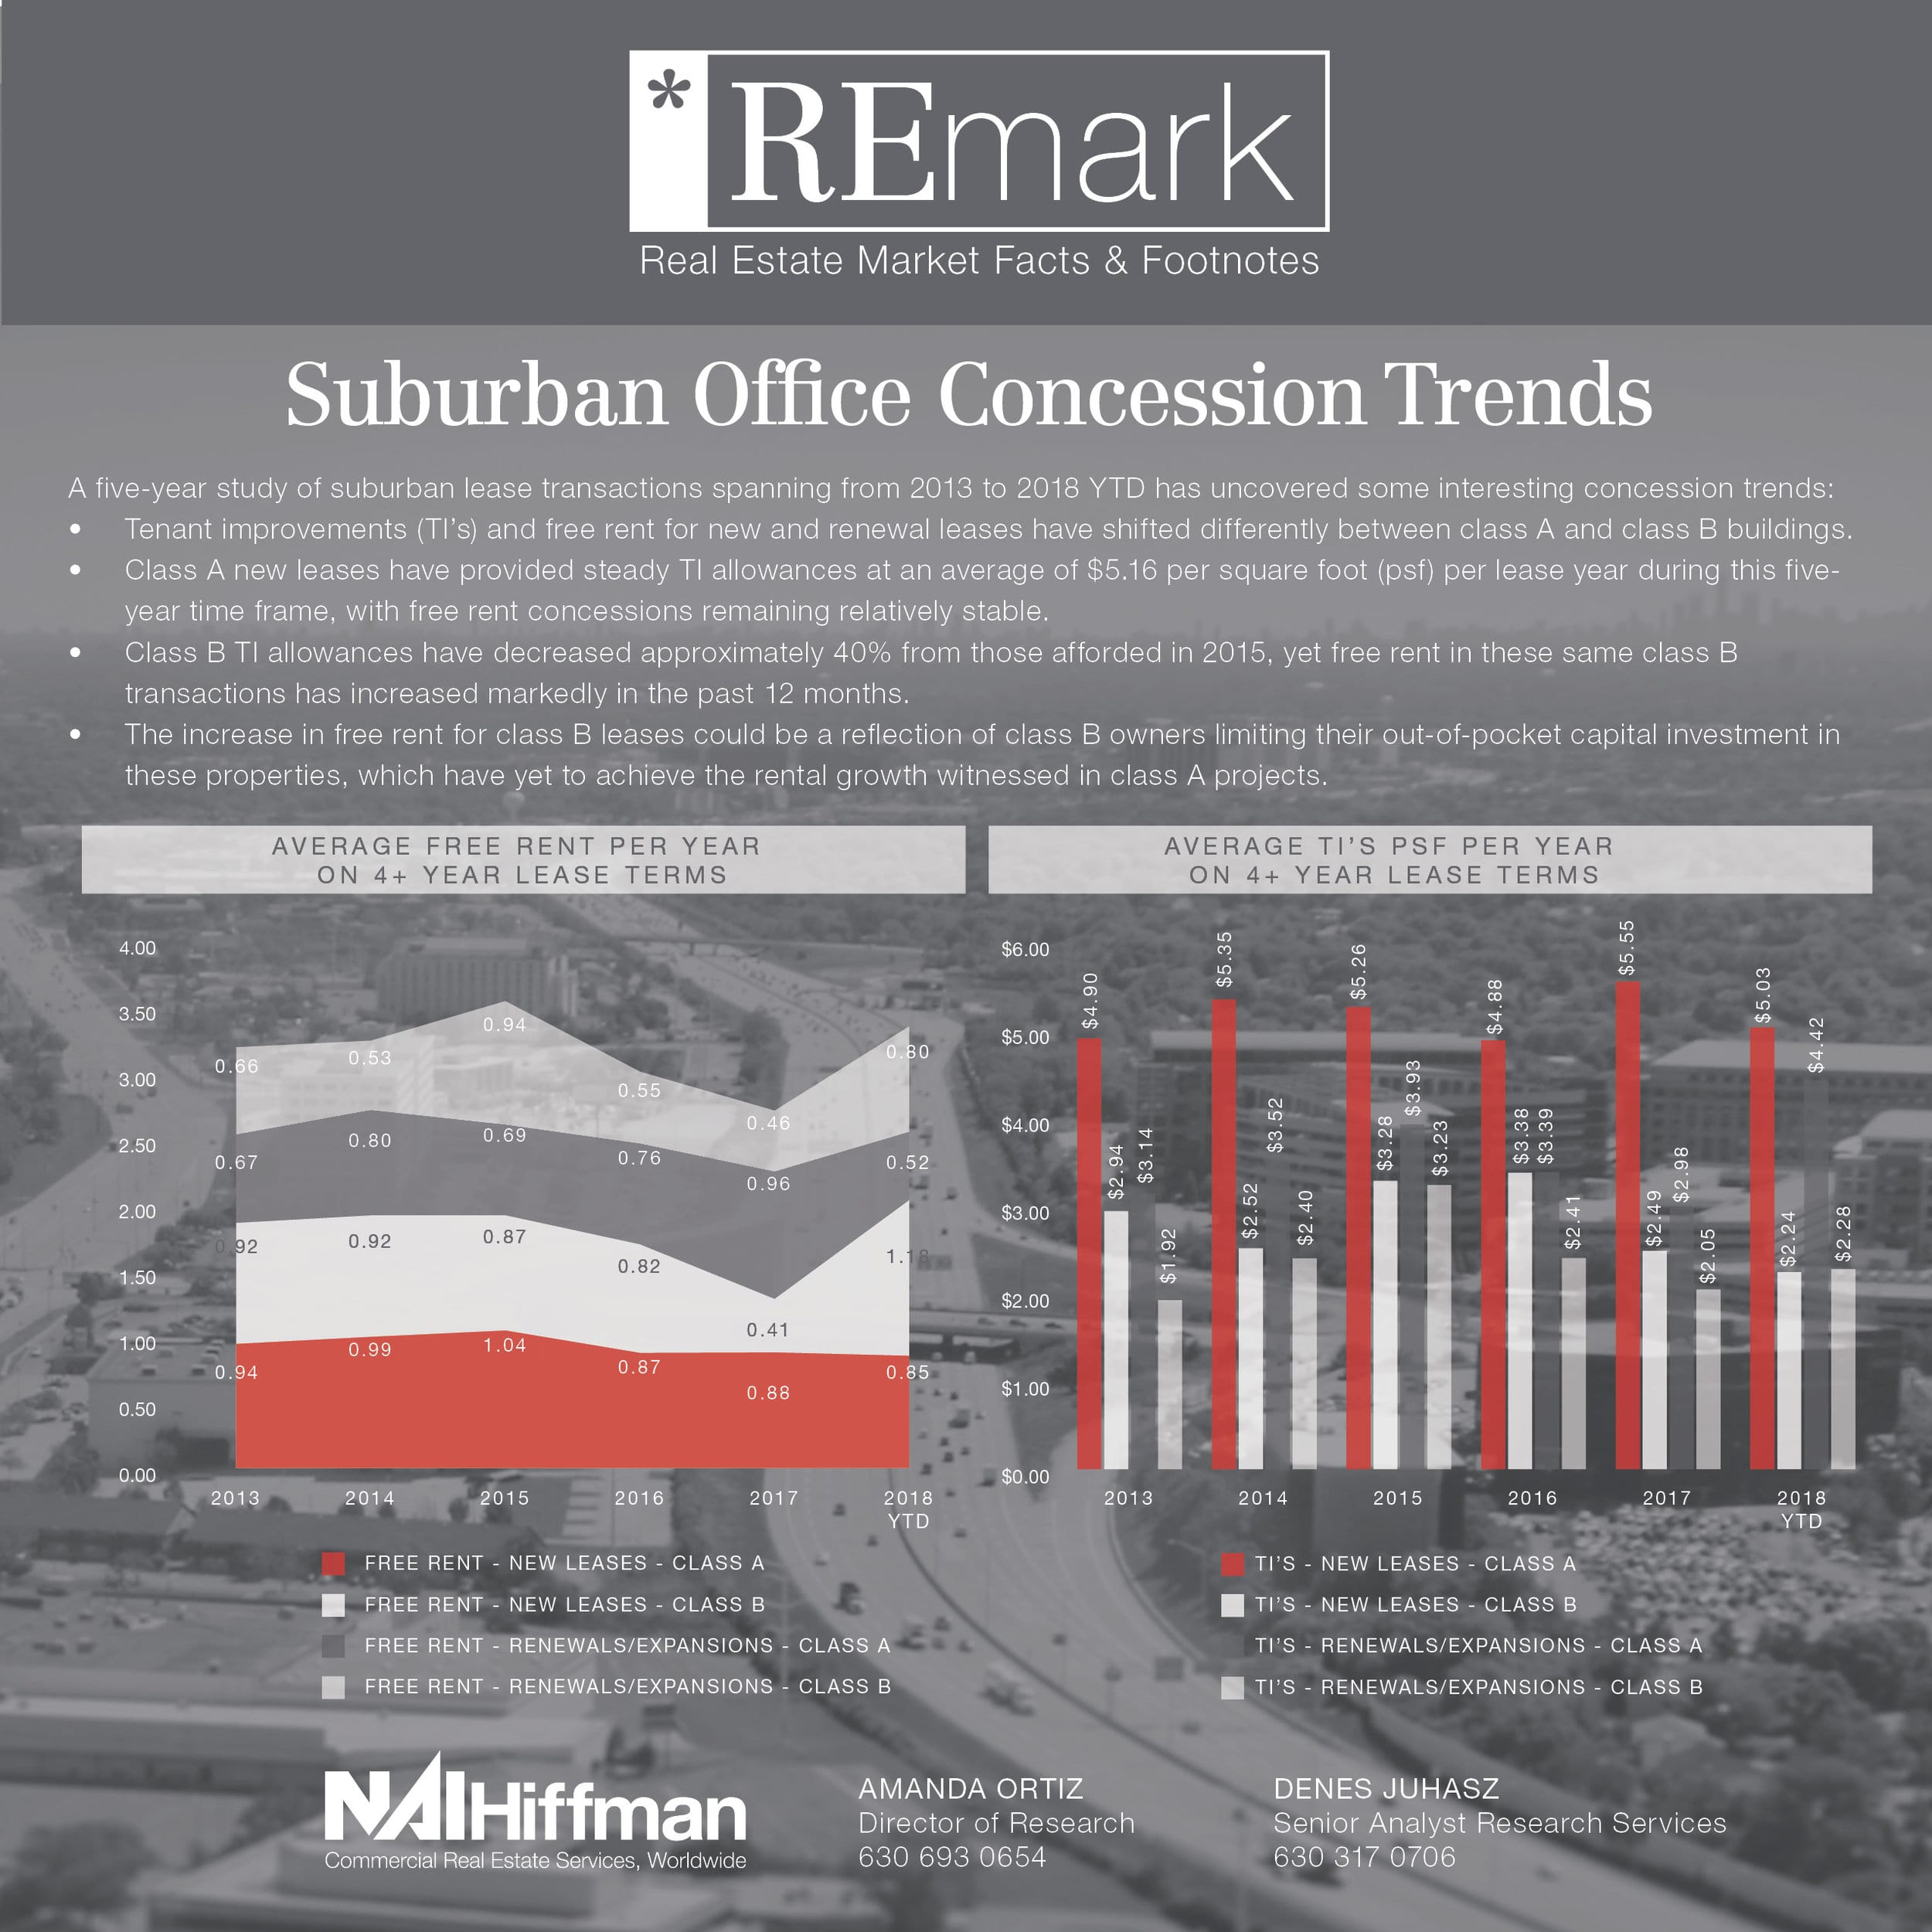 Suburban Office Concession Trends